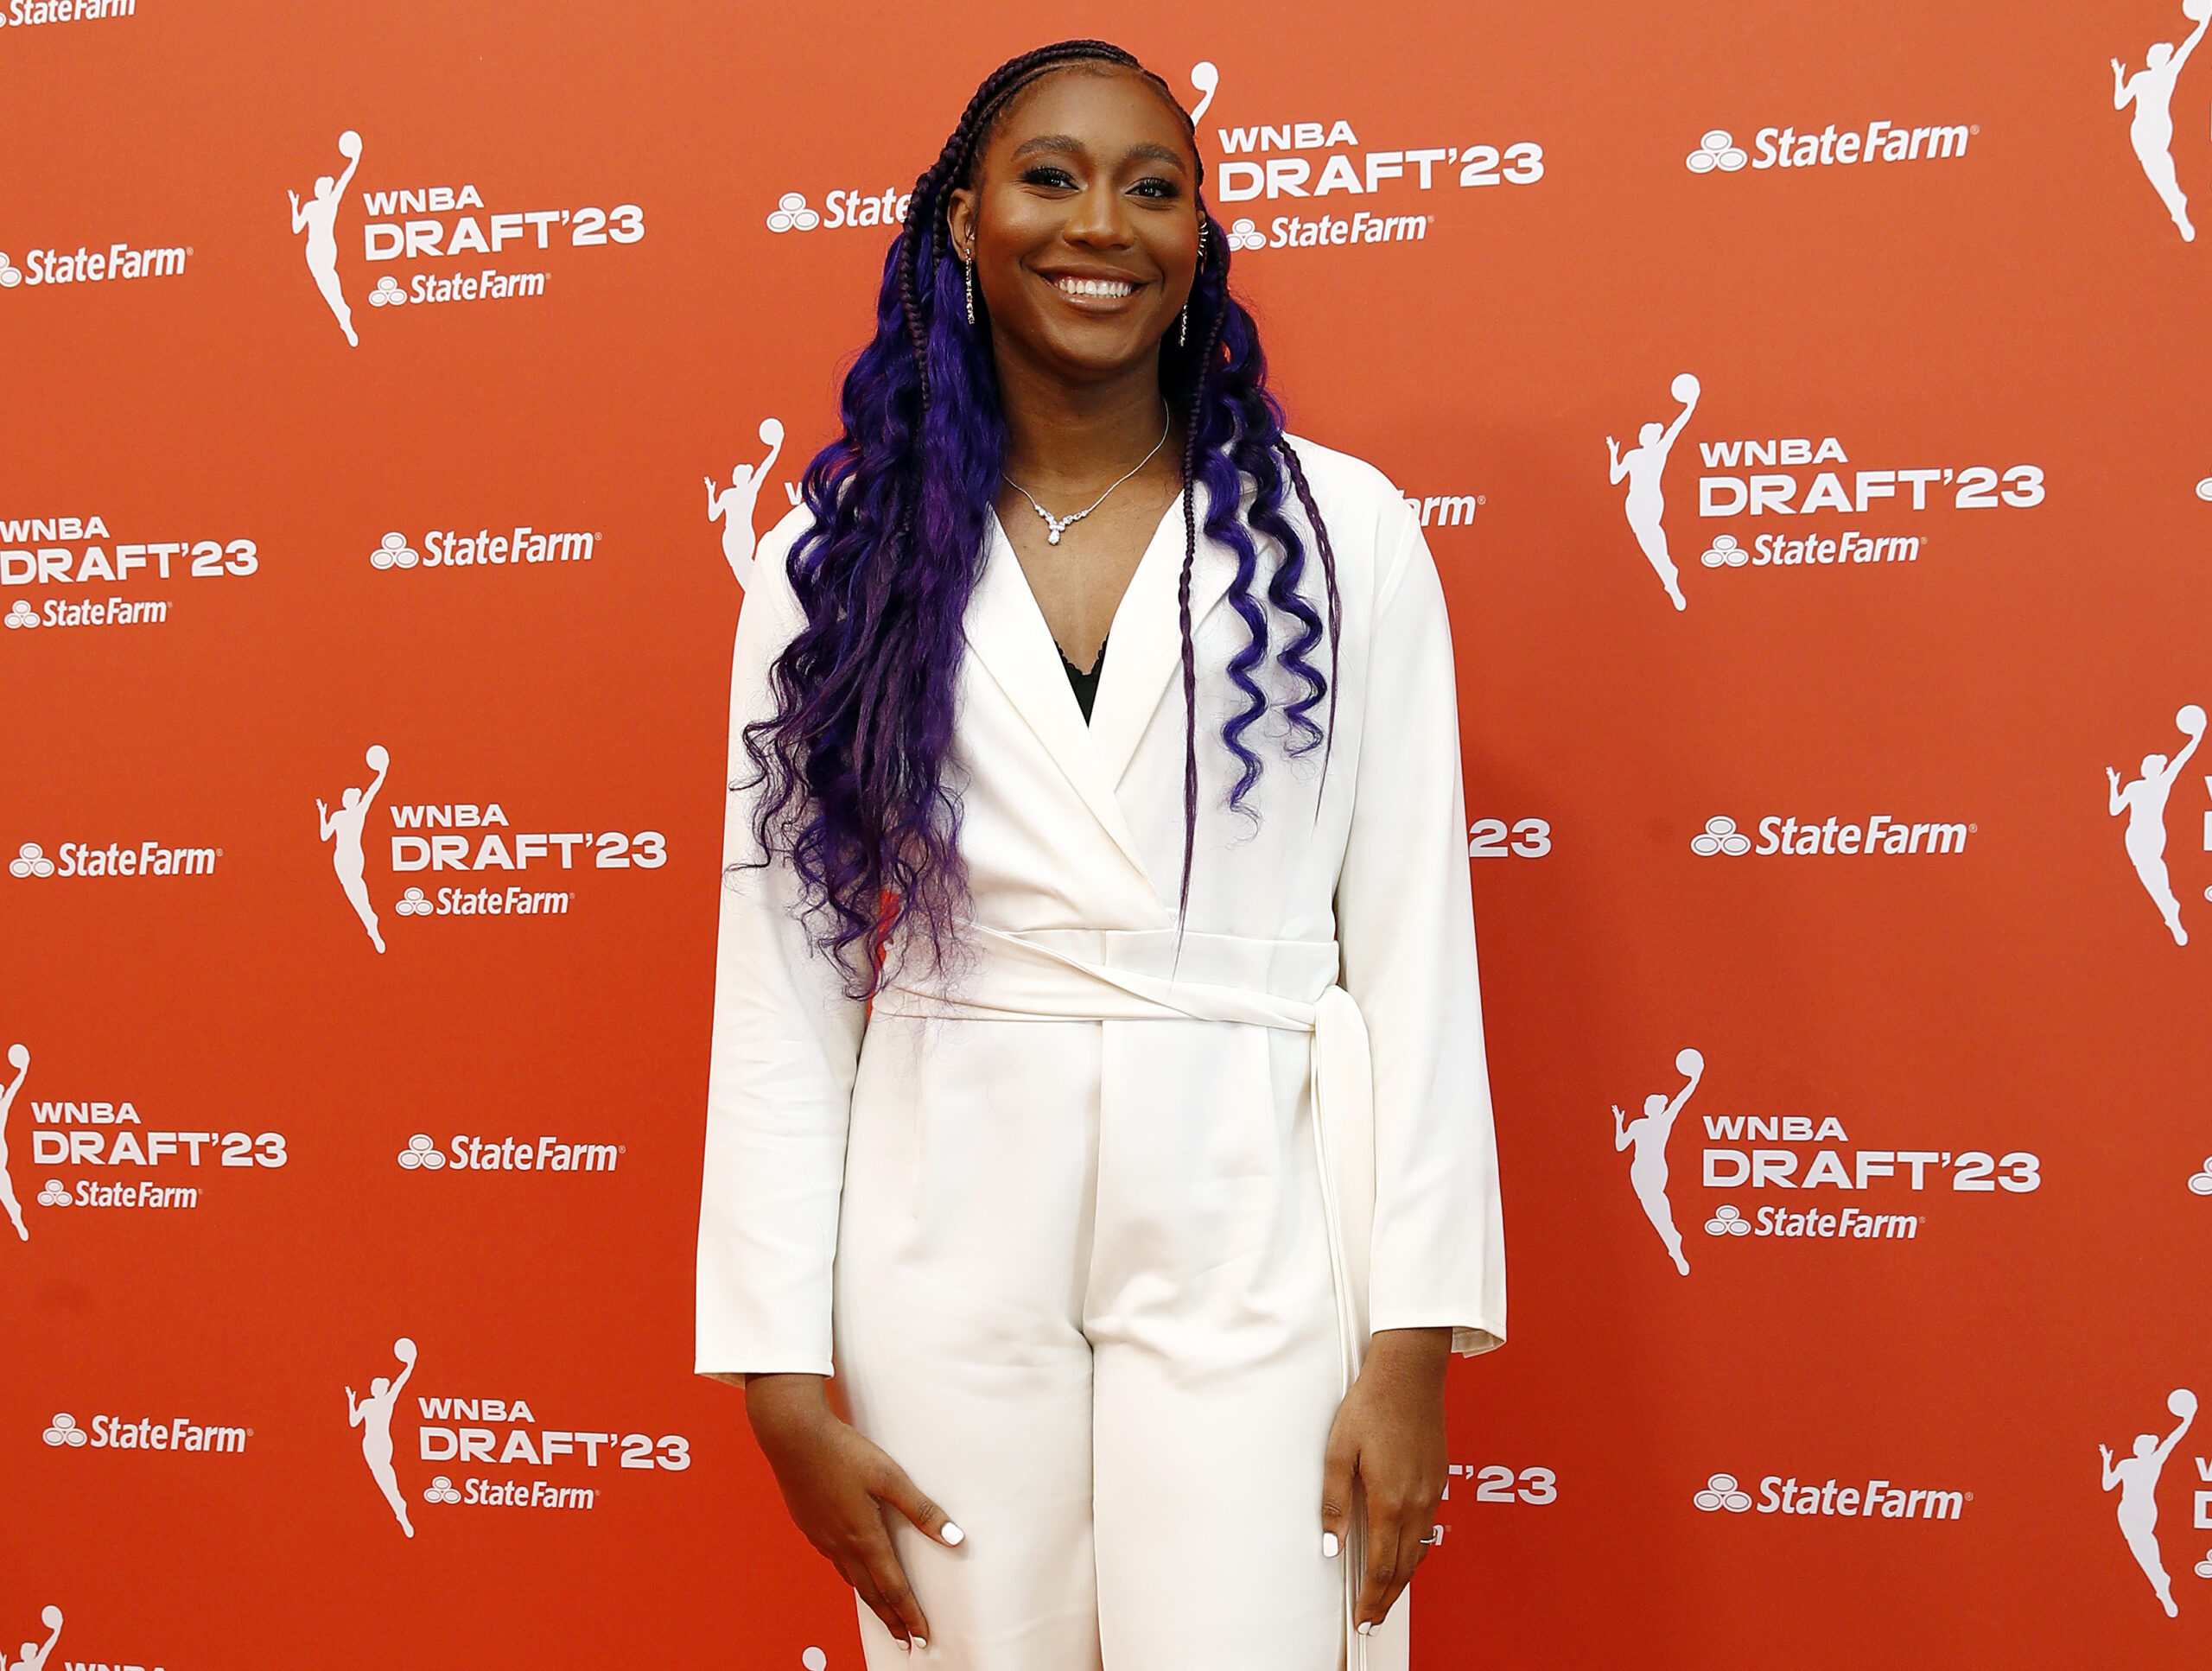 Meet The Top Picks From The WNBA Draft